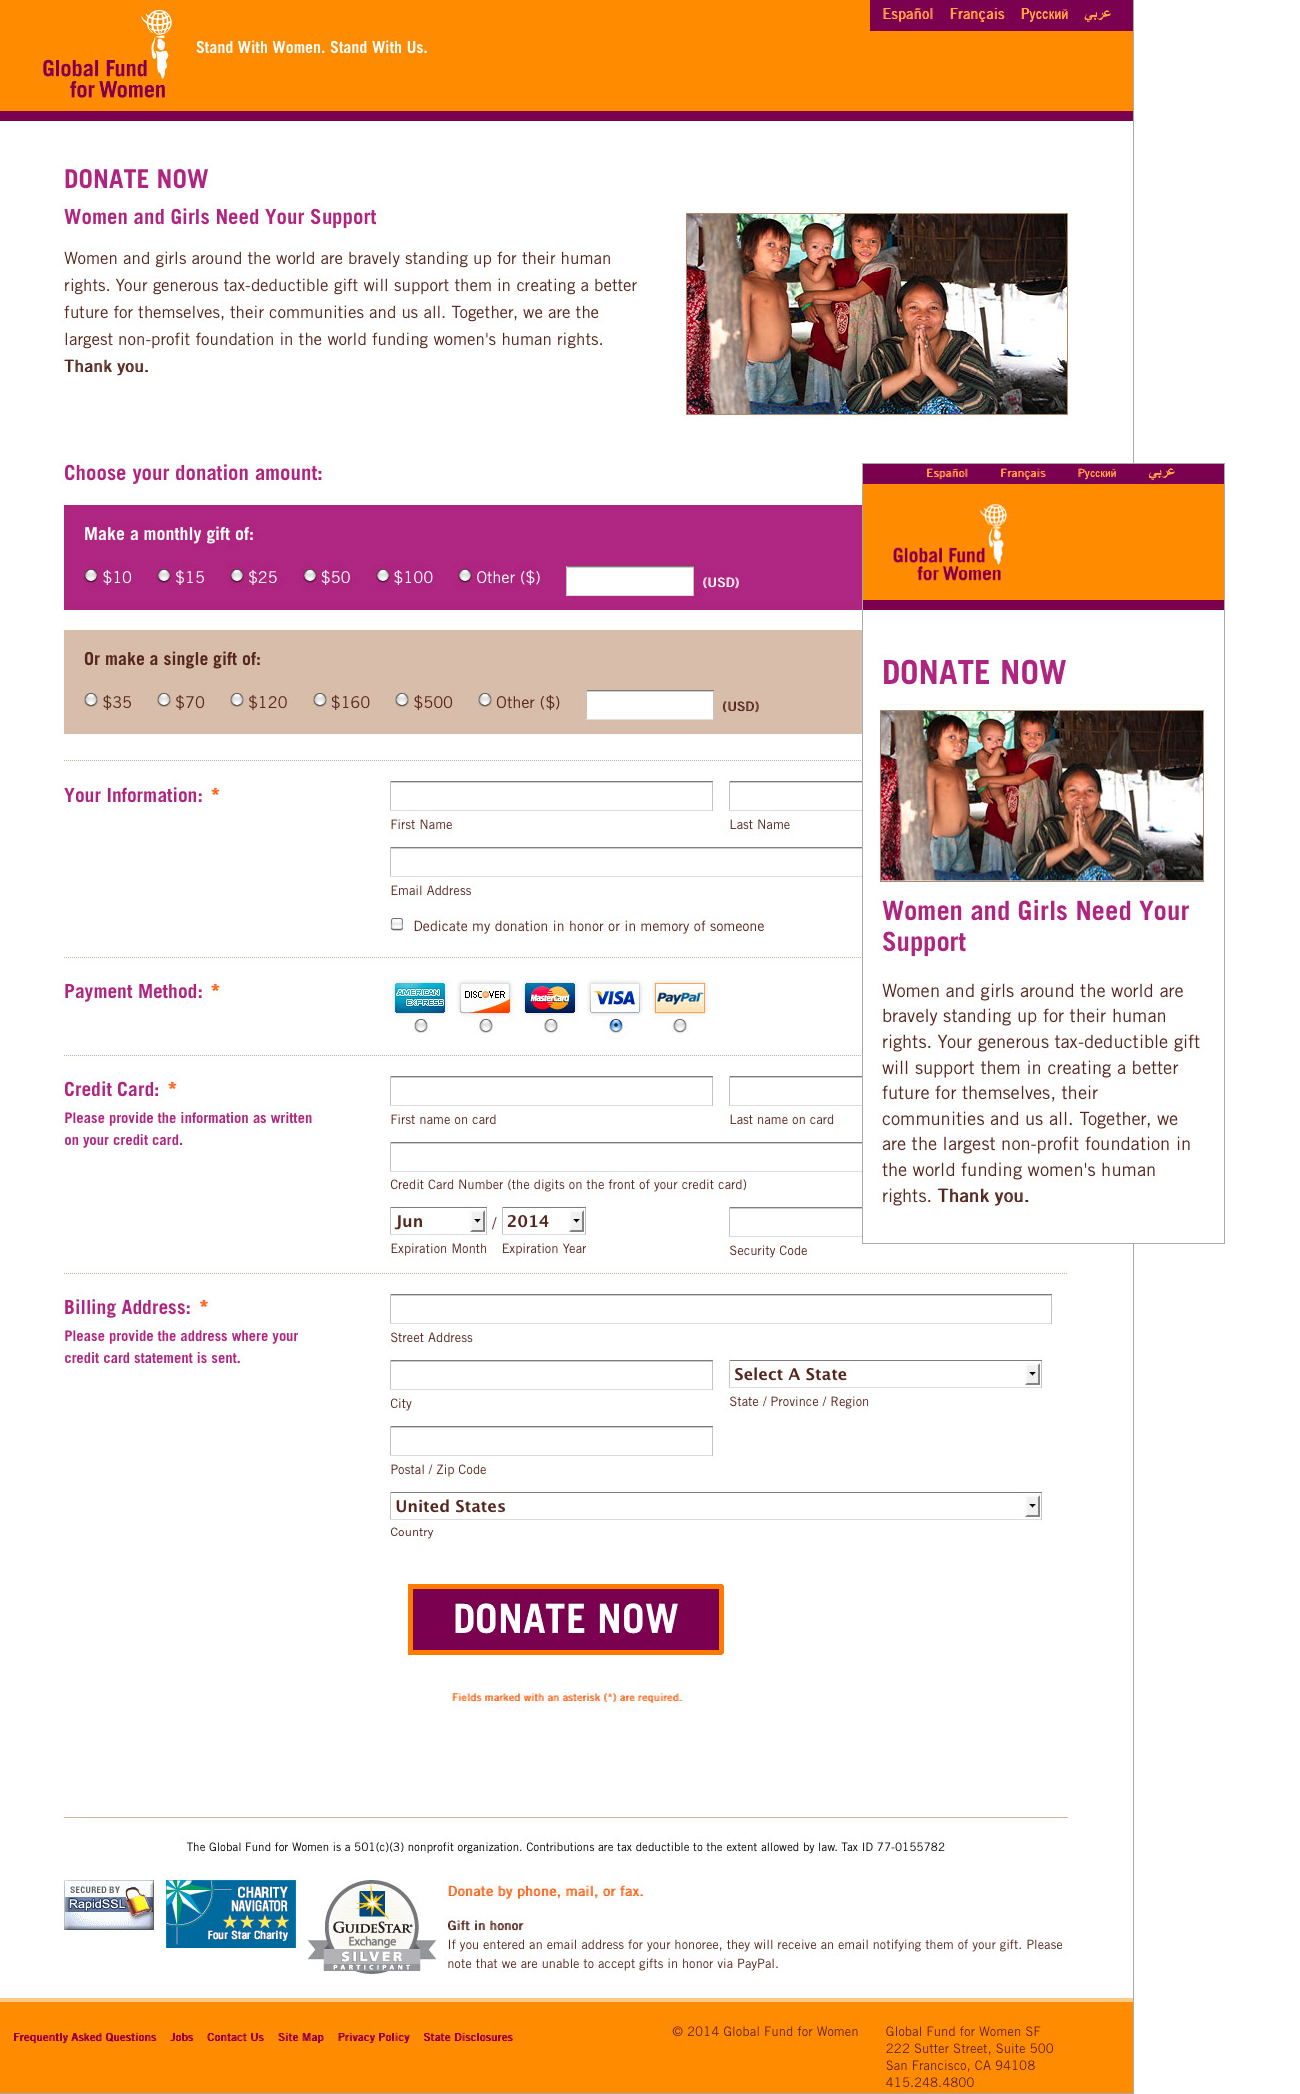 an online donate form featuring single and recurring gifts as well as both credit card and PayPal payment options